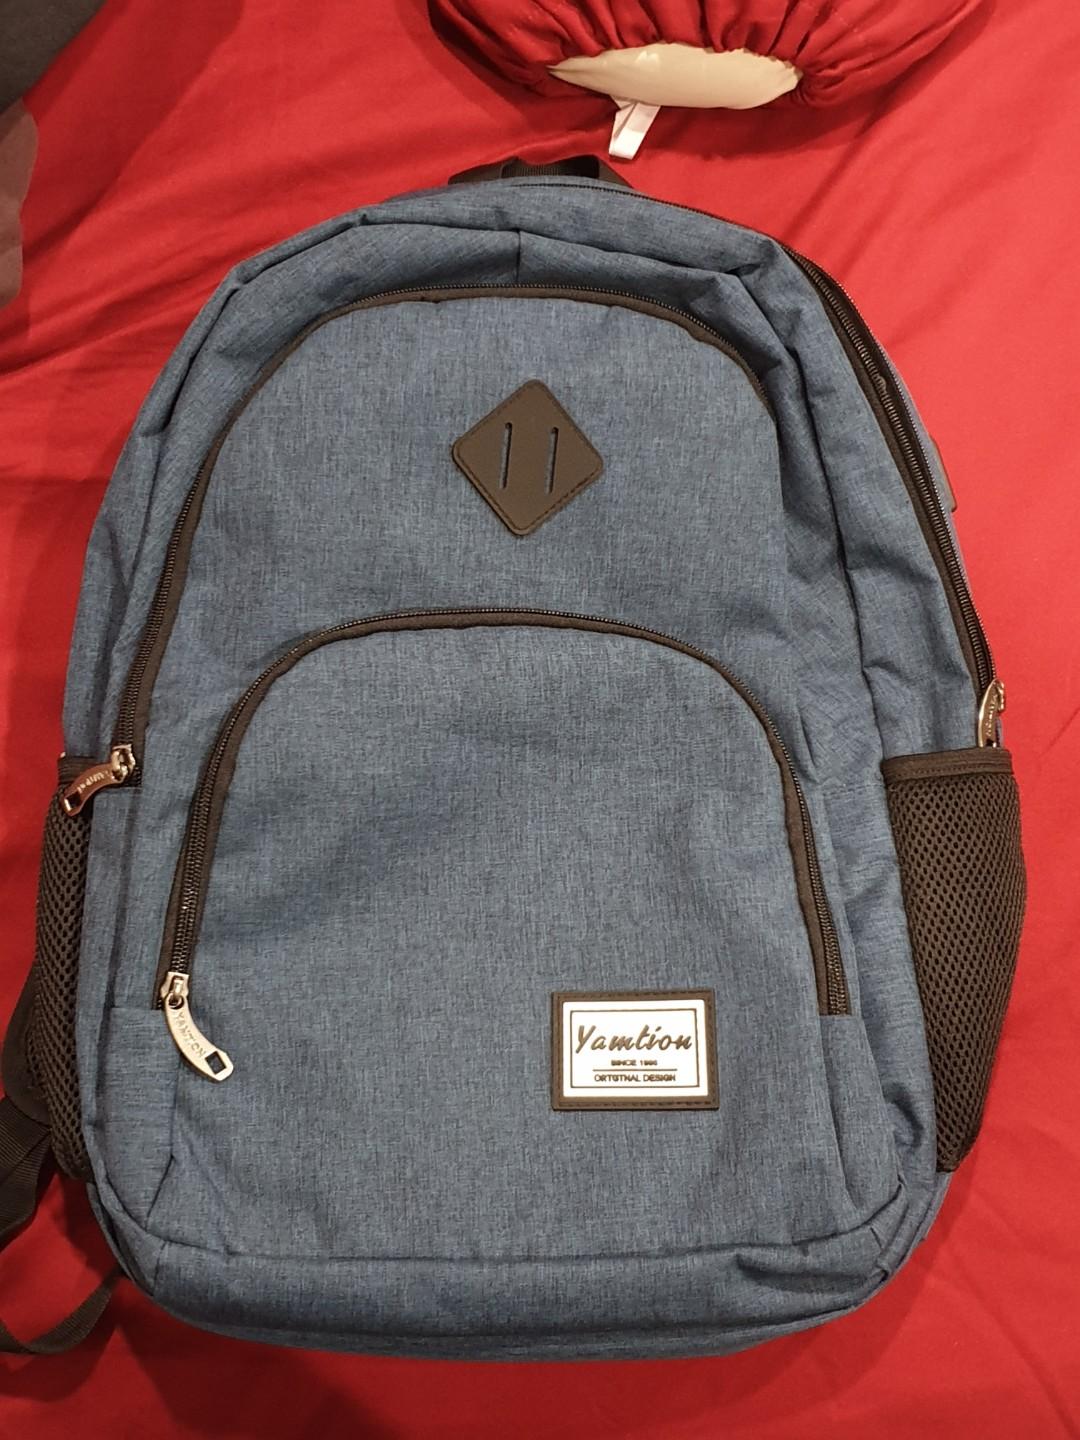 Yamtion Laptop Backpack Brand New, Computers & Tech, Parts ...